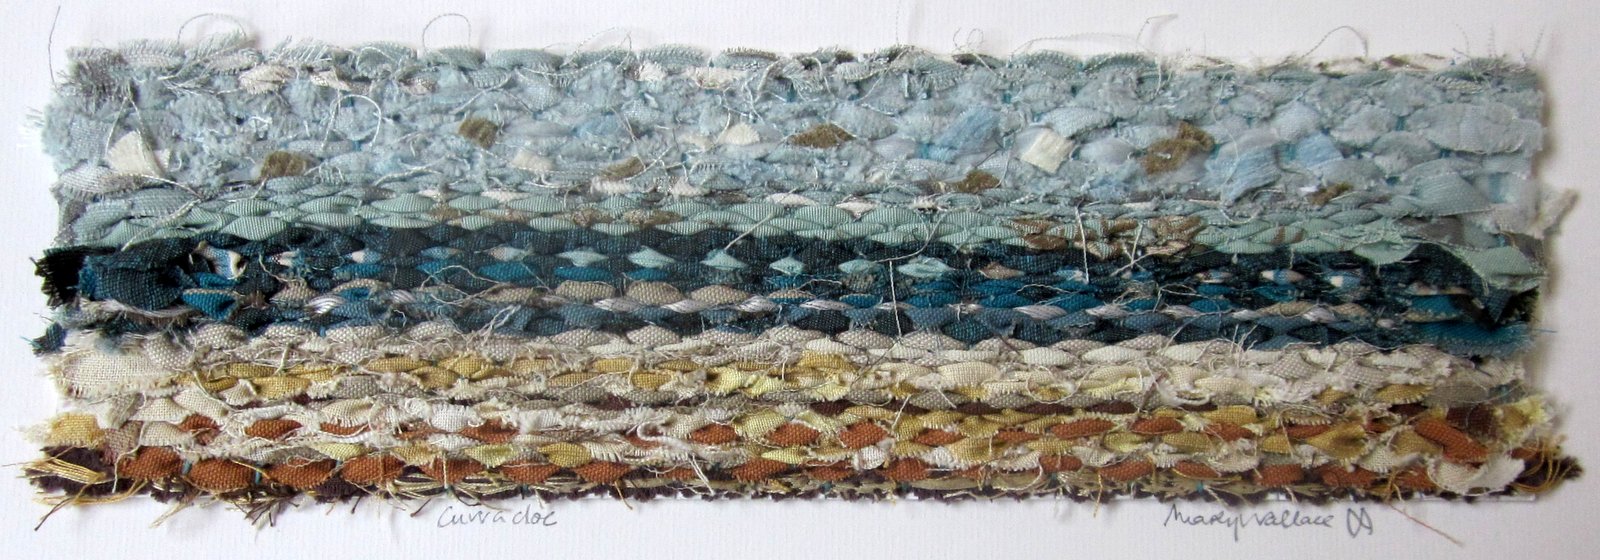 Abstract weaving with colours evoking memories of Curracloe Beach. Sand, sea, sky.